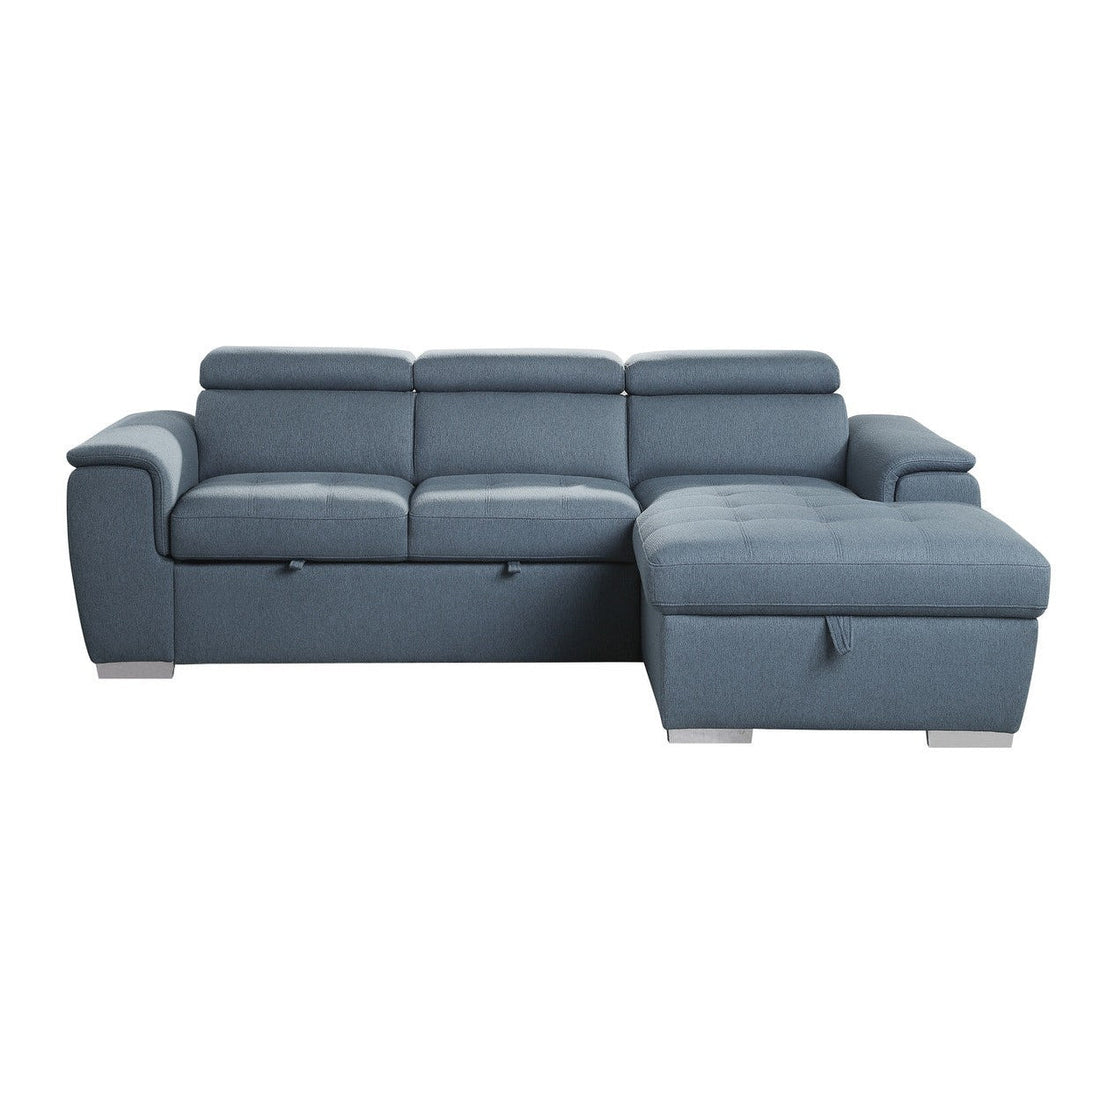 (2)2-Piece Sectional with Pull-out Bed and Adjustable Headrests 9355BU*22LRC